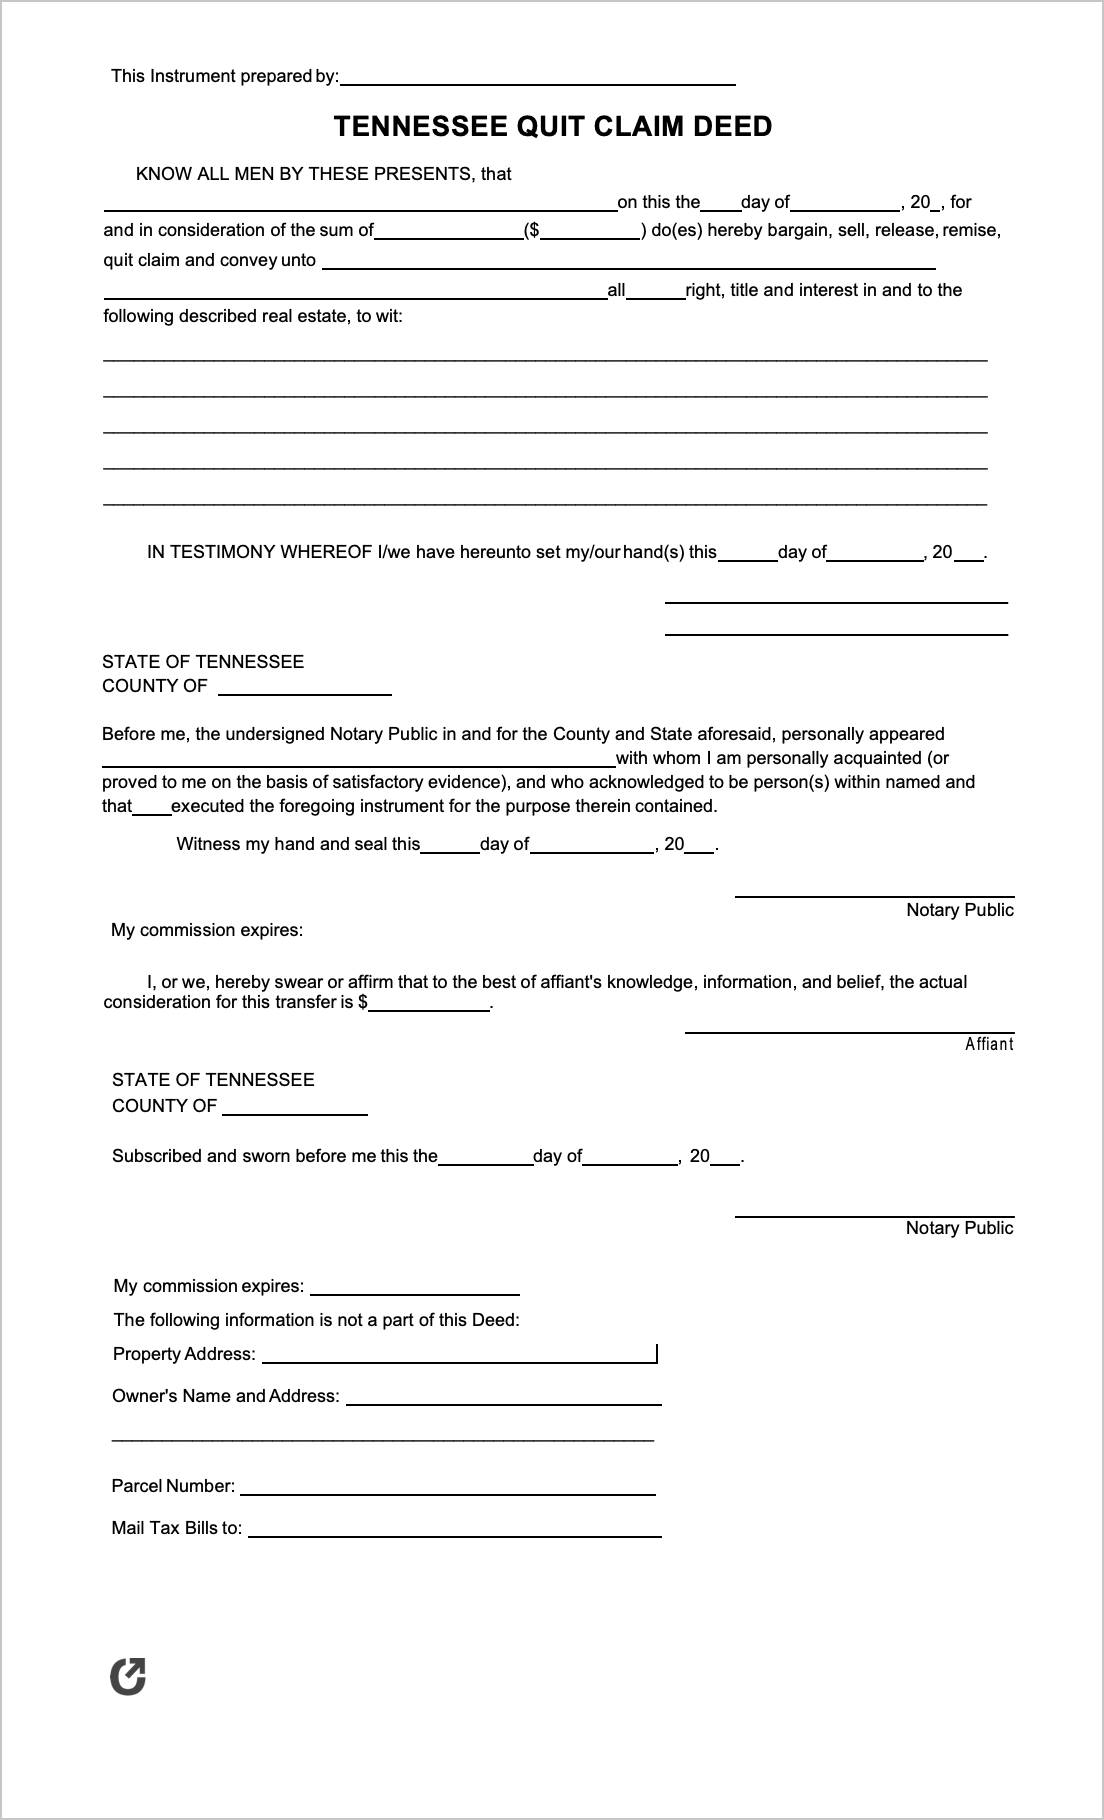 free-printable-quit-claim-deed-form-michigan-printable-forms-free-online